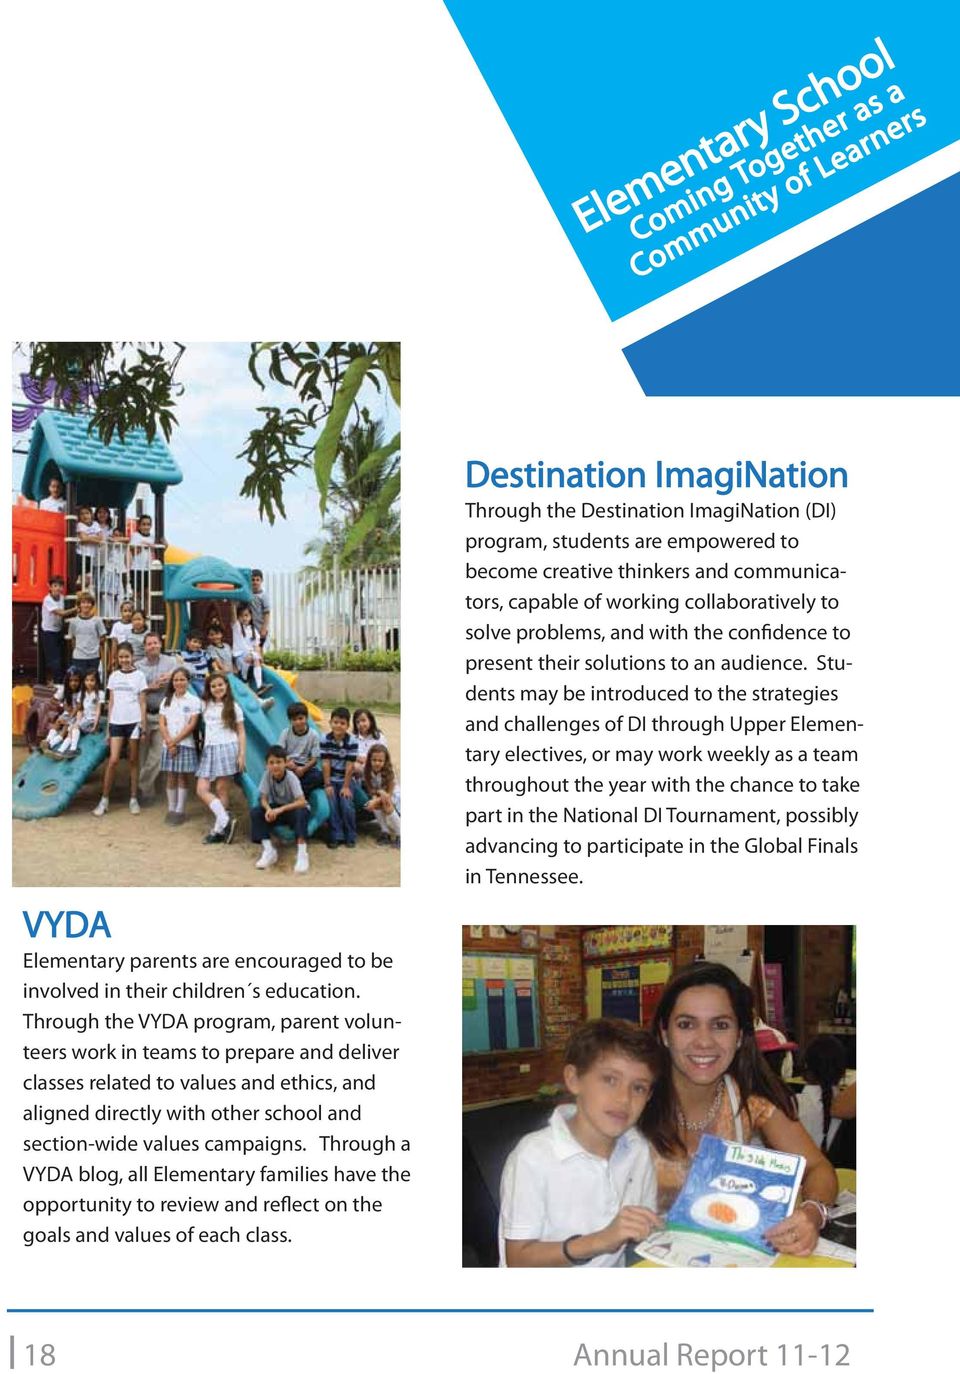 Through a VYDA blog, all Elementary families have the opportunity to review and reflect on the goals and values of each class.